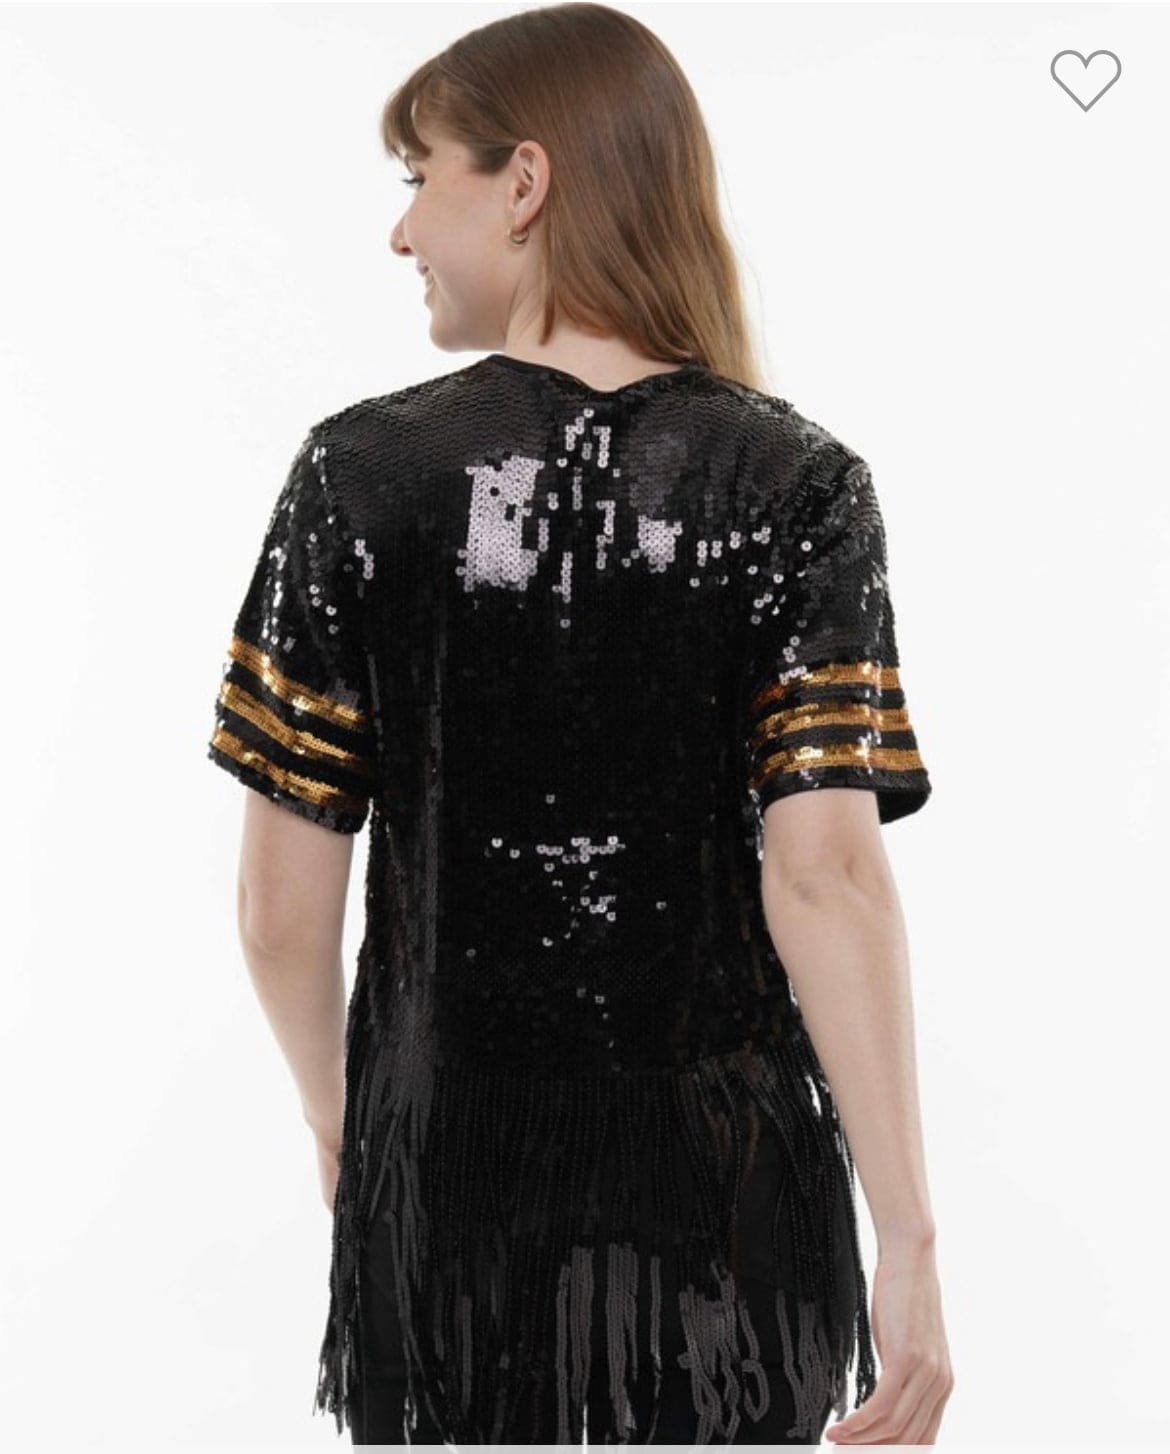 Game Day fringe sequin top